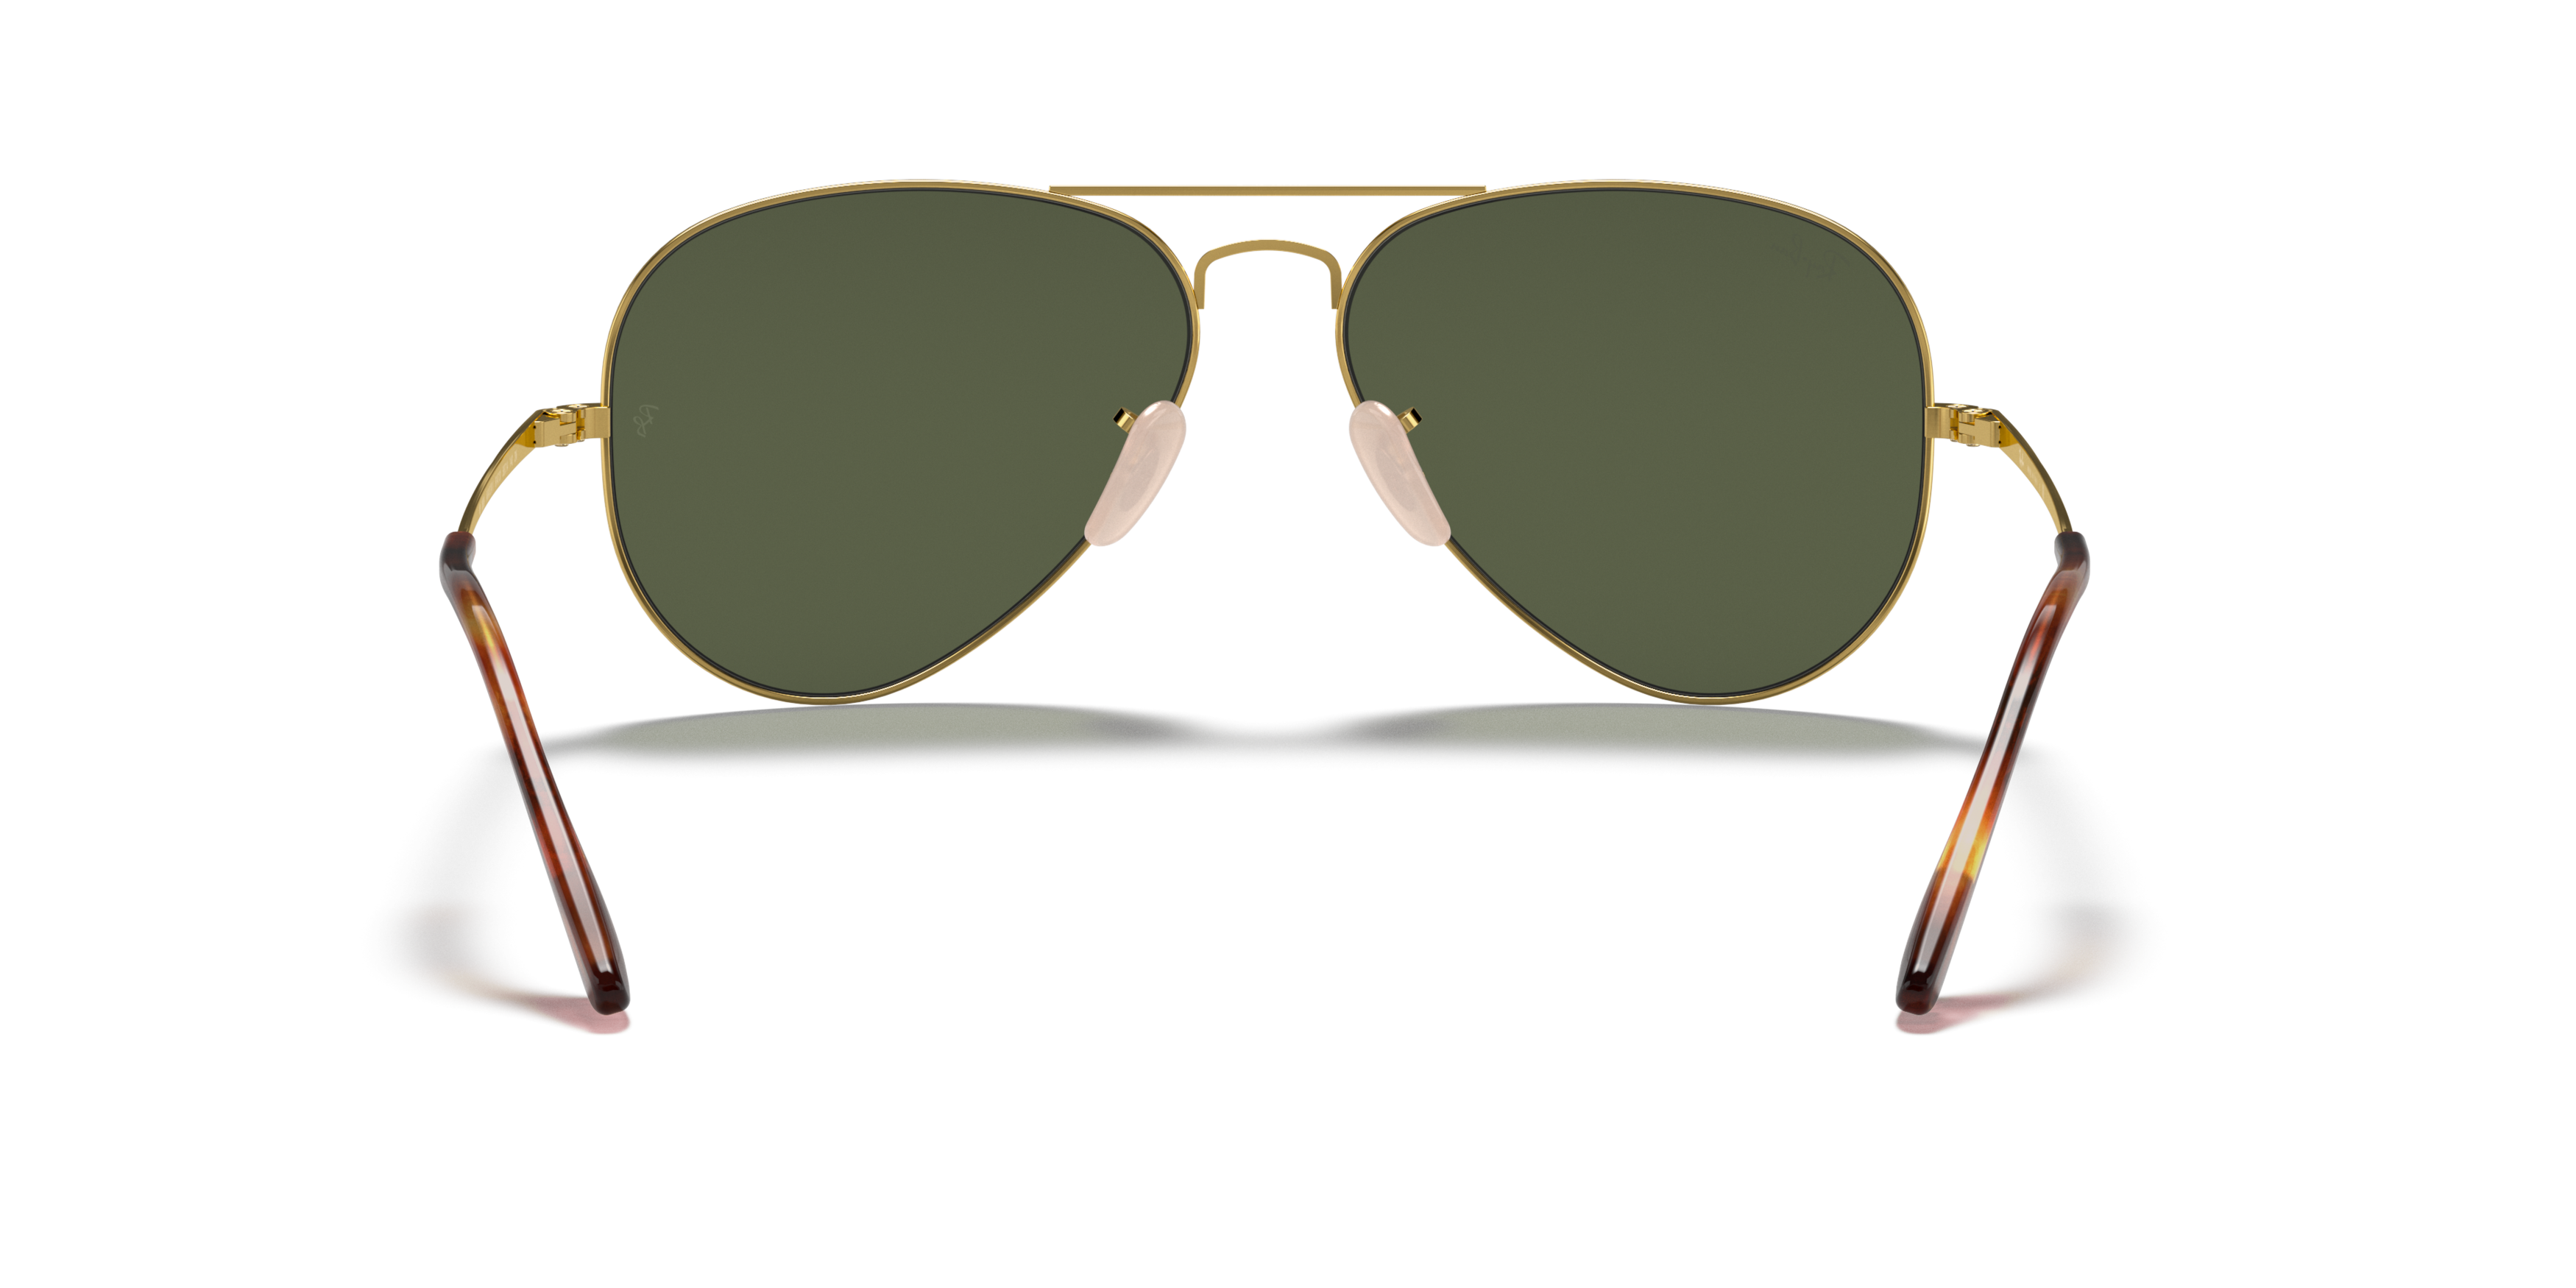 [products.image.detail02] Ray-Ban Aviator Metal II RB3689 914731